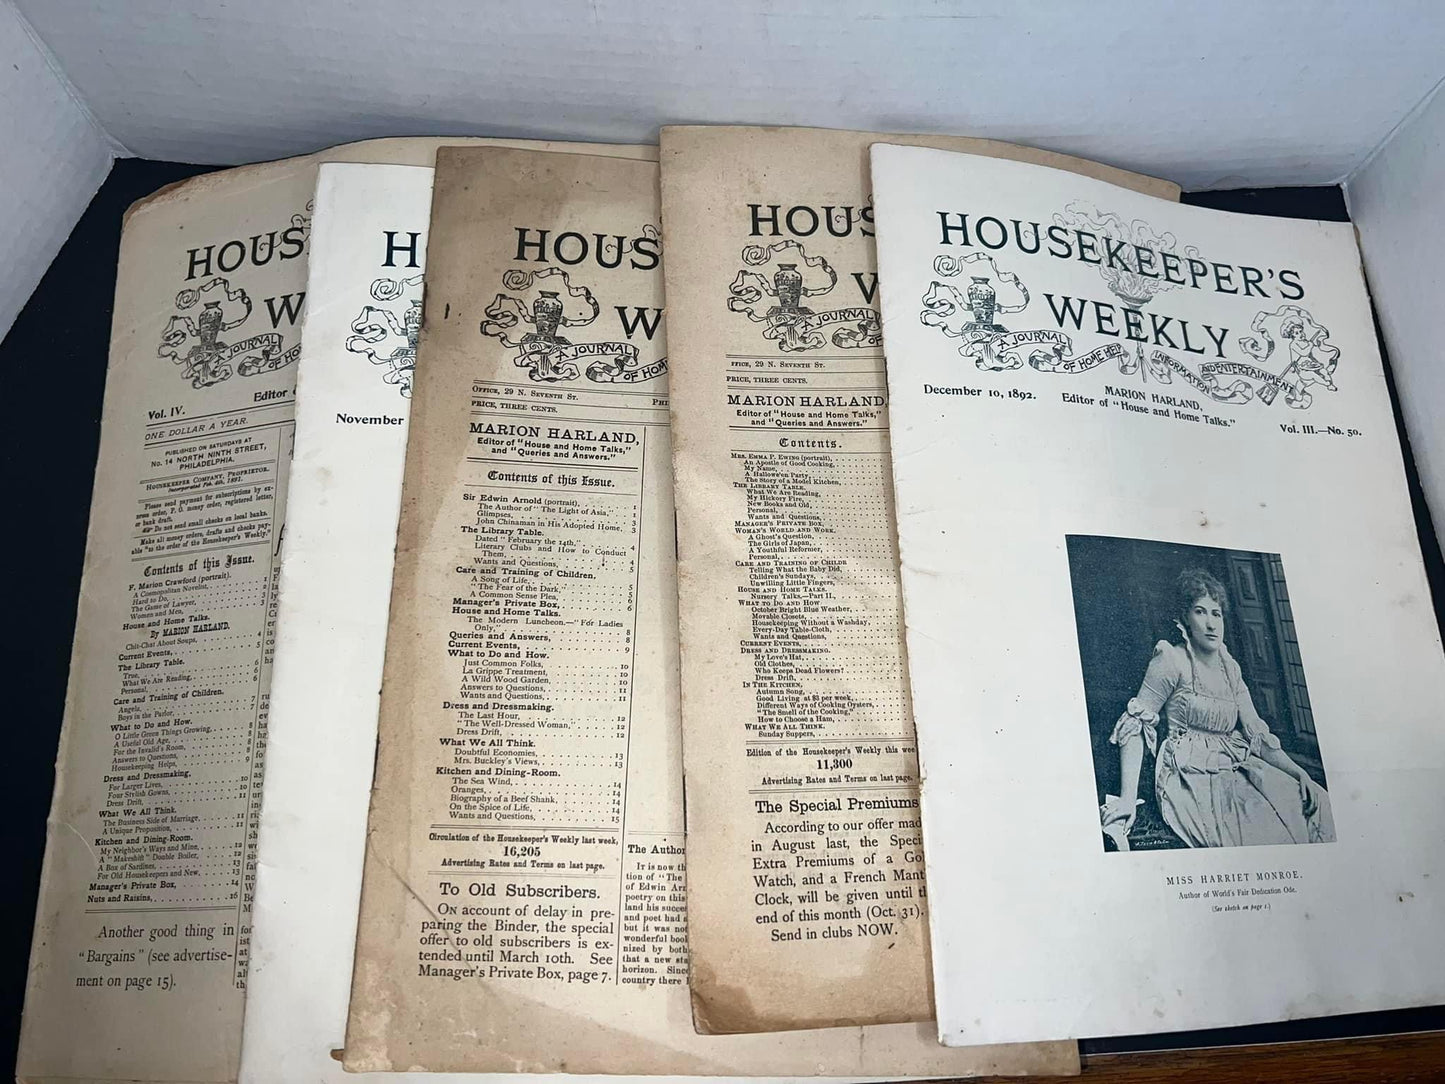 Antique Victorian magazine 1891-1893

5 vol - housekeepers weekly

Early advertising